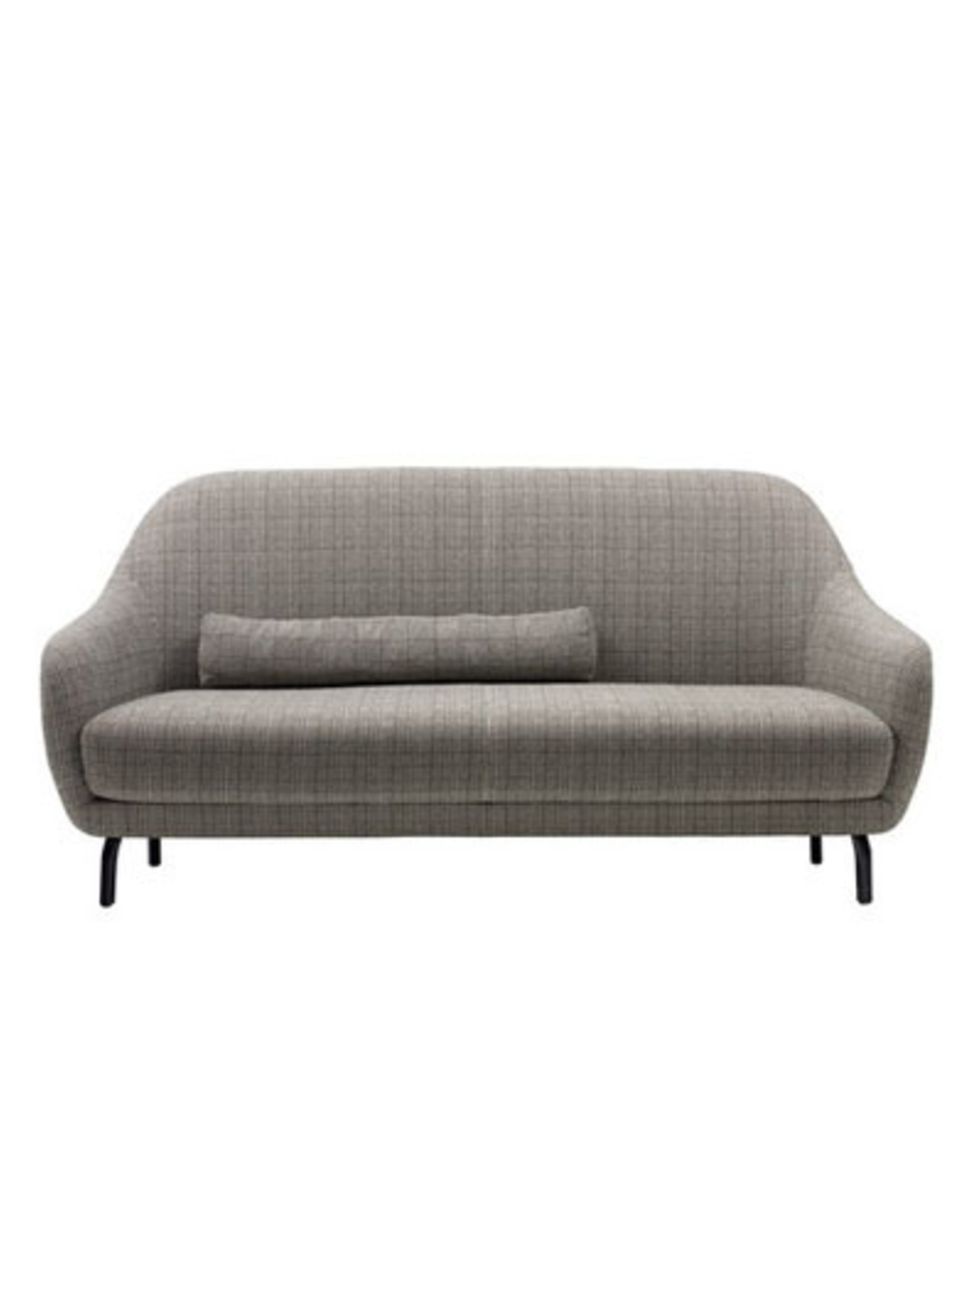 Couch, Furniture, Outdoor furniture, Rectangle, Black, Comfort, Grey, studio couch, Futon pad, Armrest, 